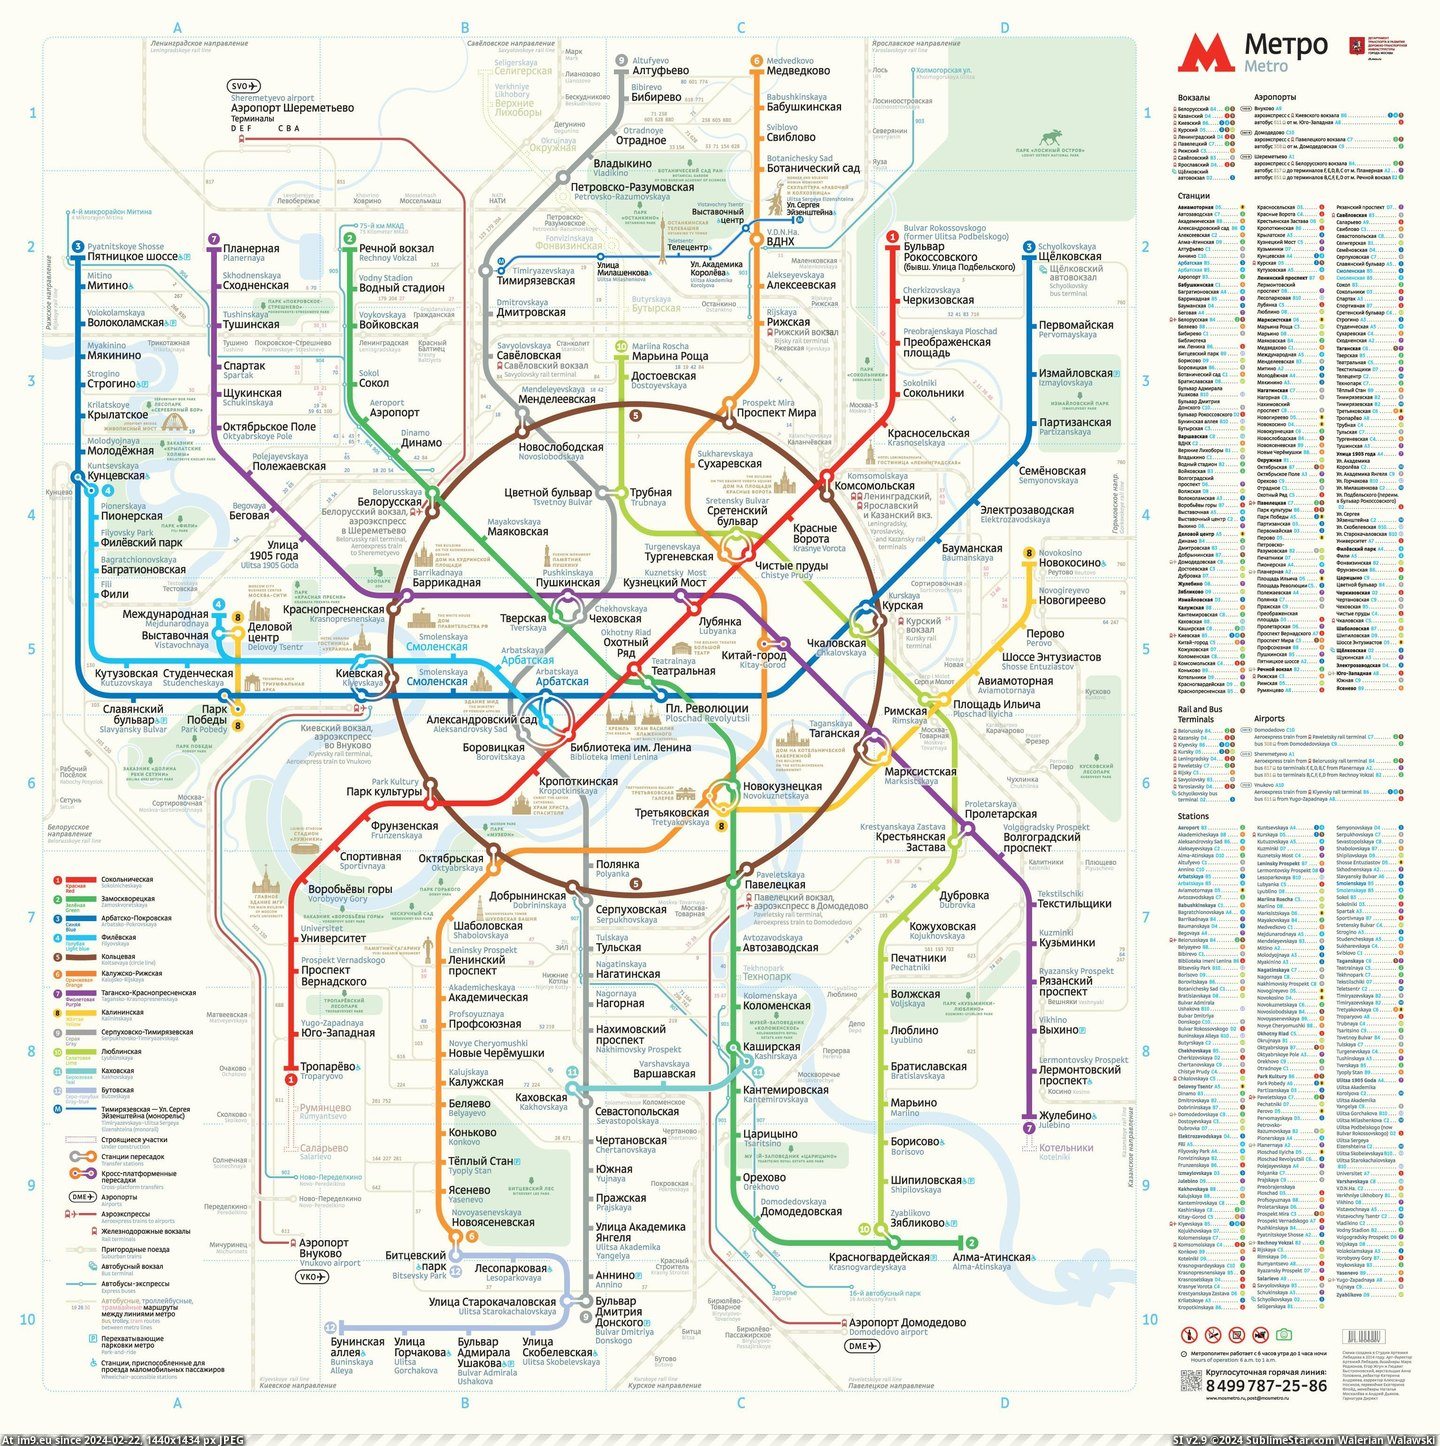 #Map #Metro #Vestibules #Moscow [Mapporn] New Moscow metro map for vestibules [3068x3068] Pic. (Изображение из альбом My r/MAPS favs))